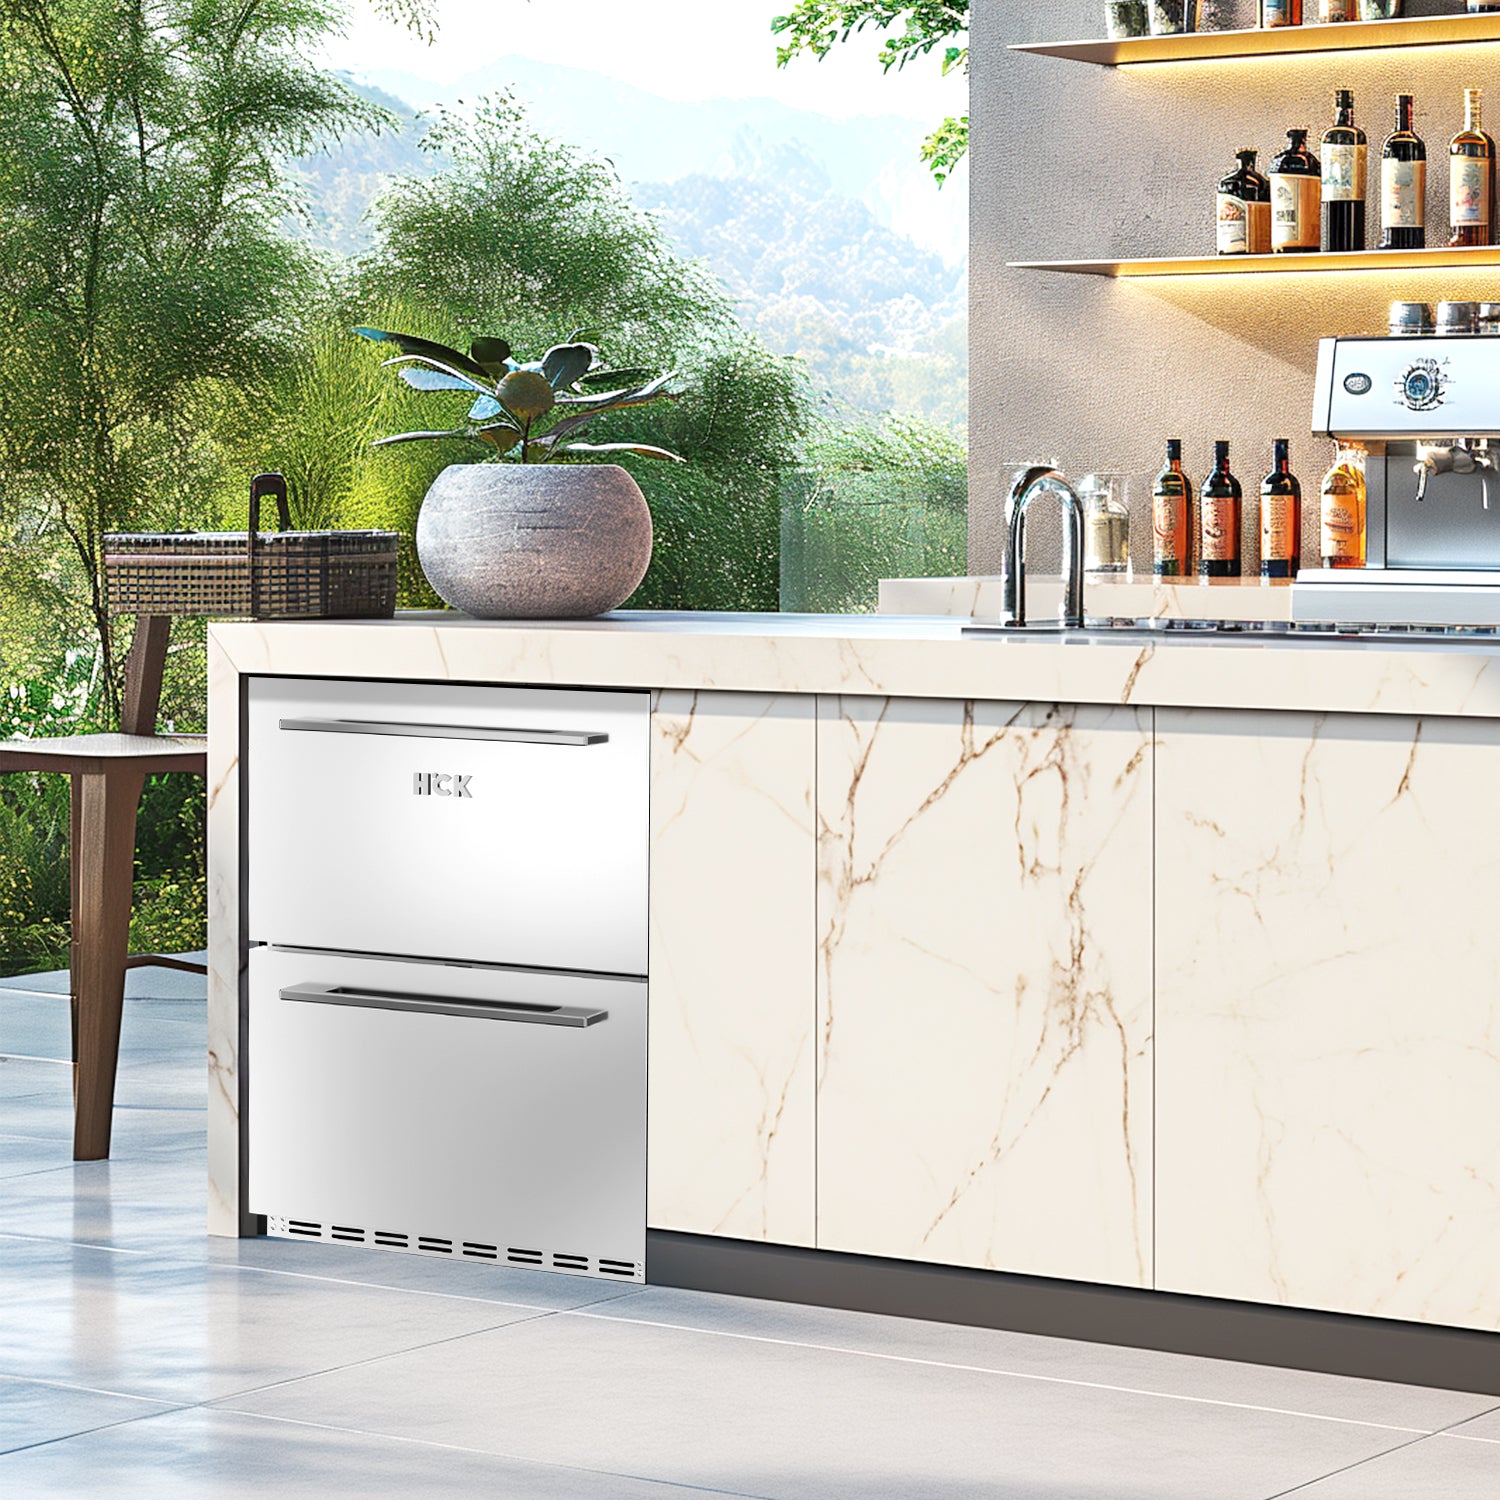 Side view of an outdoor kitchen setup with a 5.12 Cu Ft Undercounter Beverage Outdoor Refrigerator Drawer Design installed under the kitchen table, with a potted flower positioned above the fridge